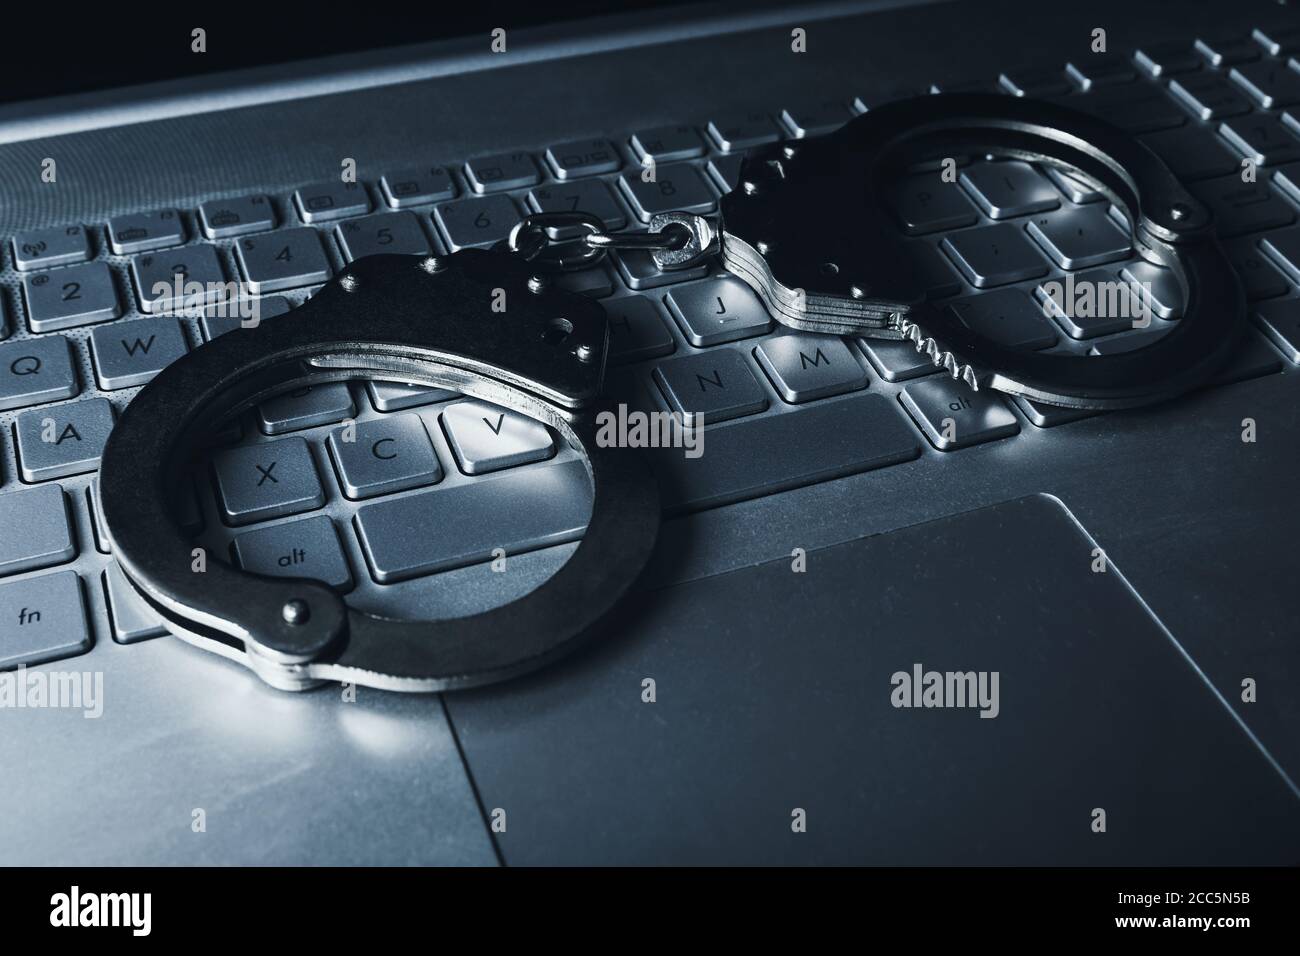 internet fraud cyber crime concept - handcuffs on laptop keybpord Stock Photo